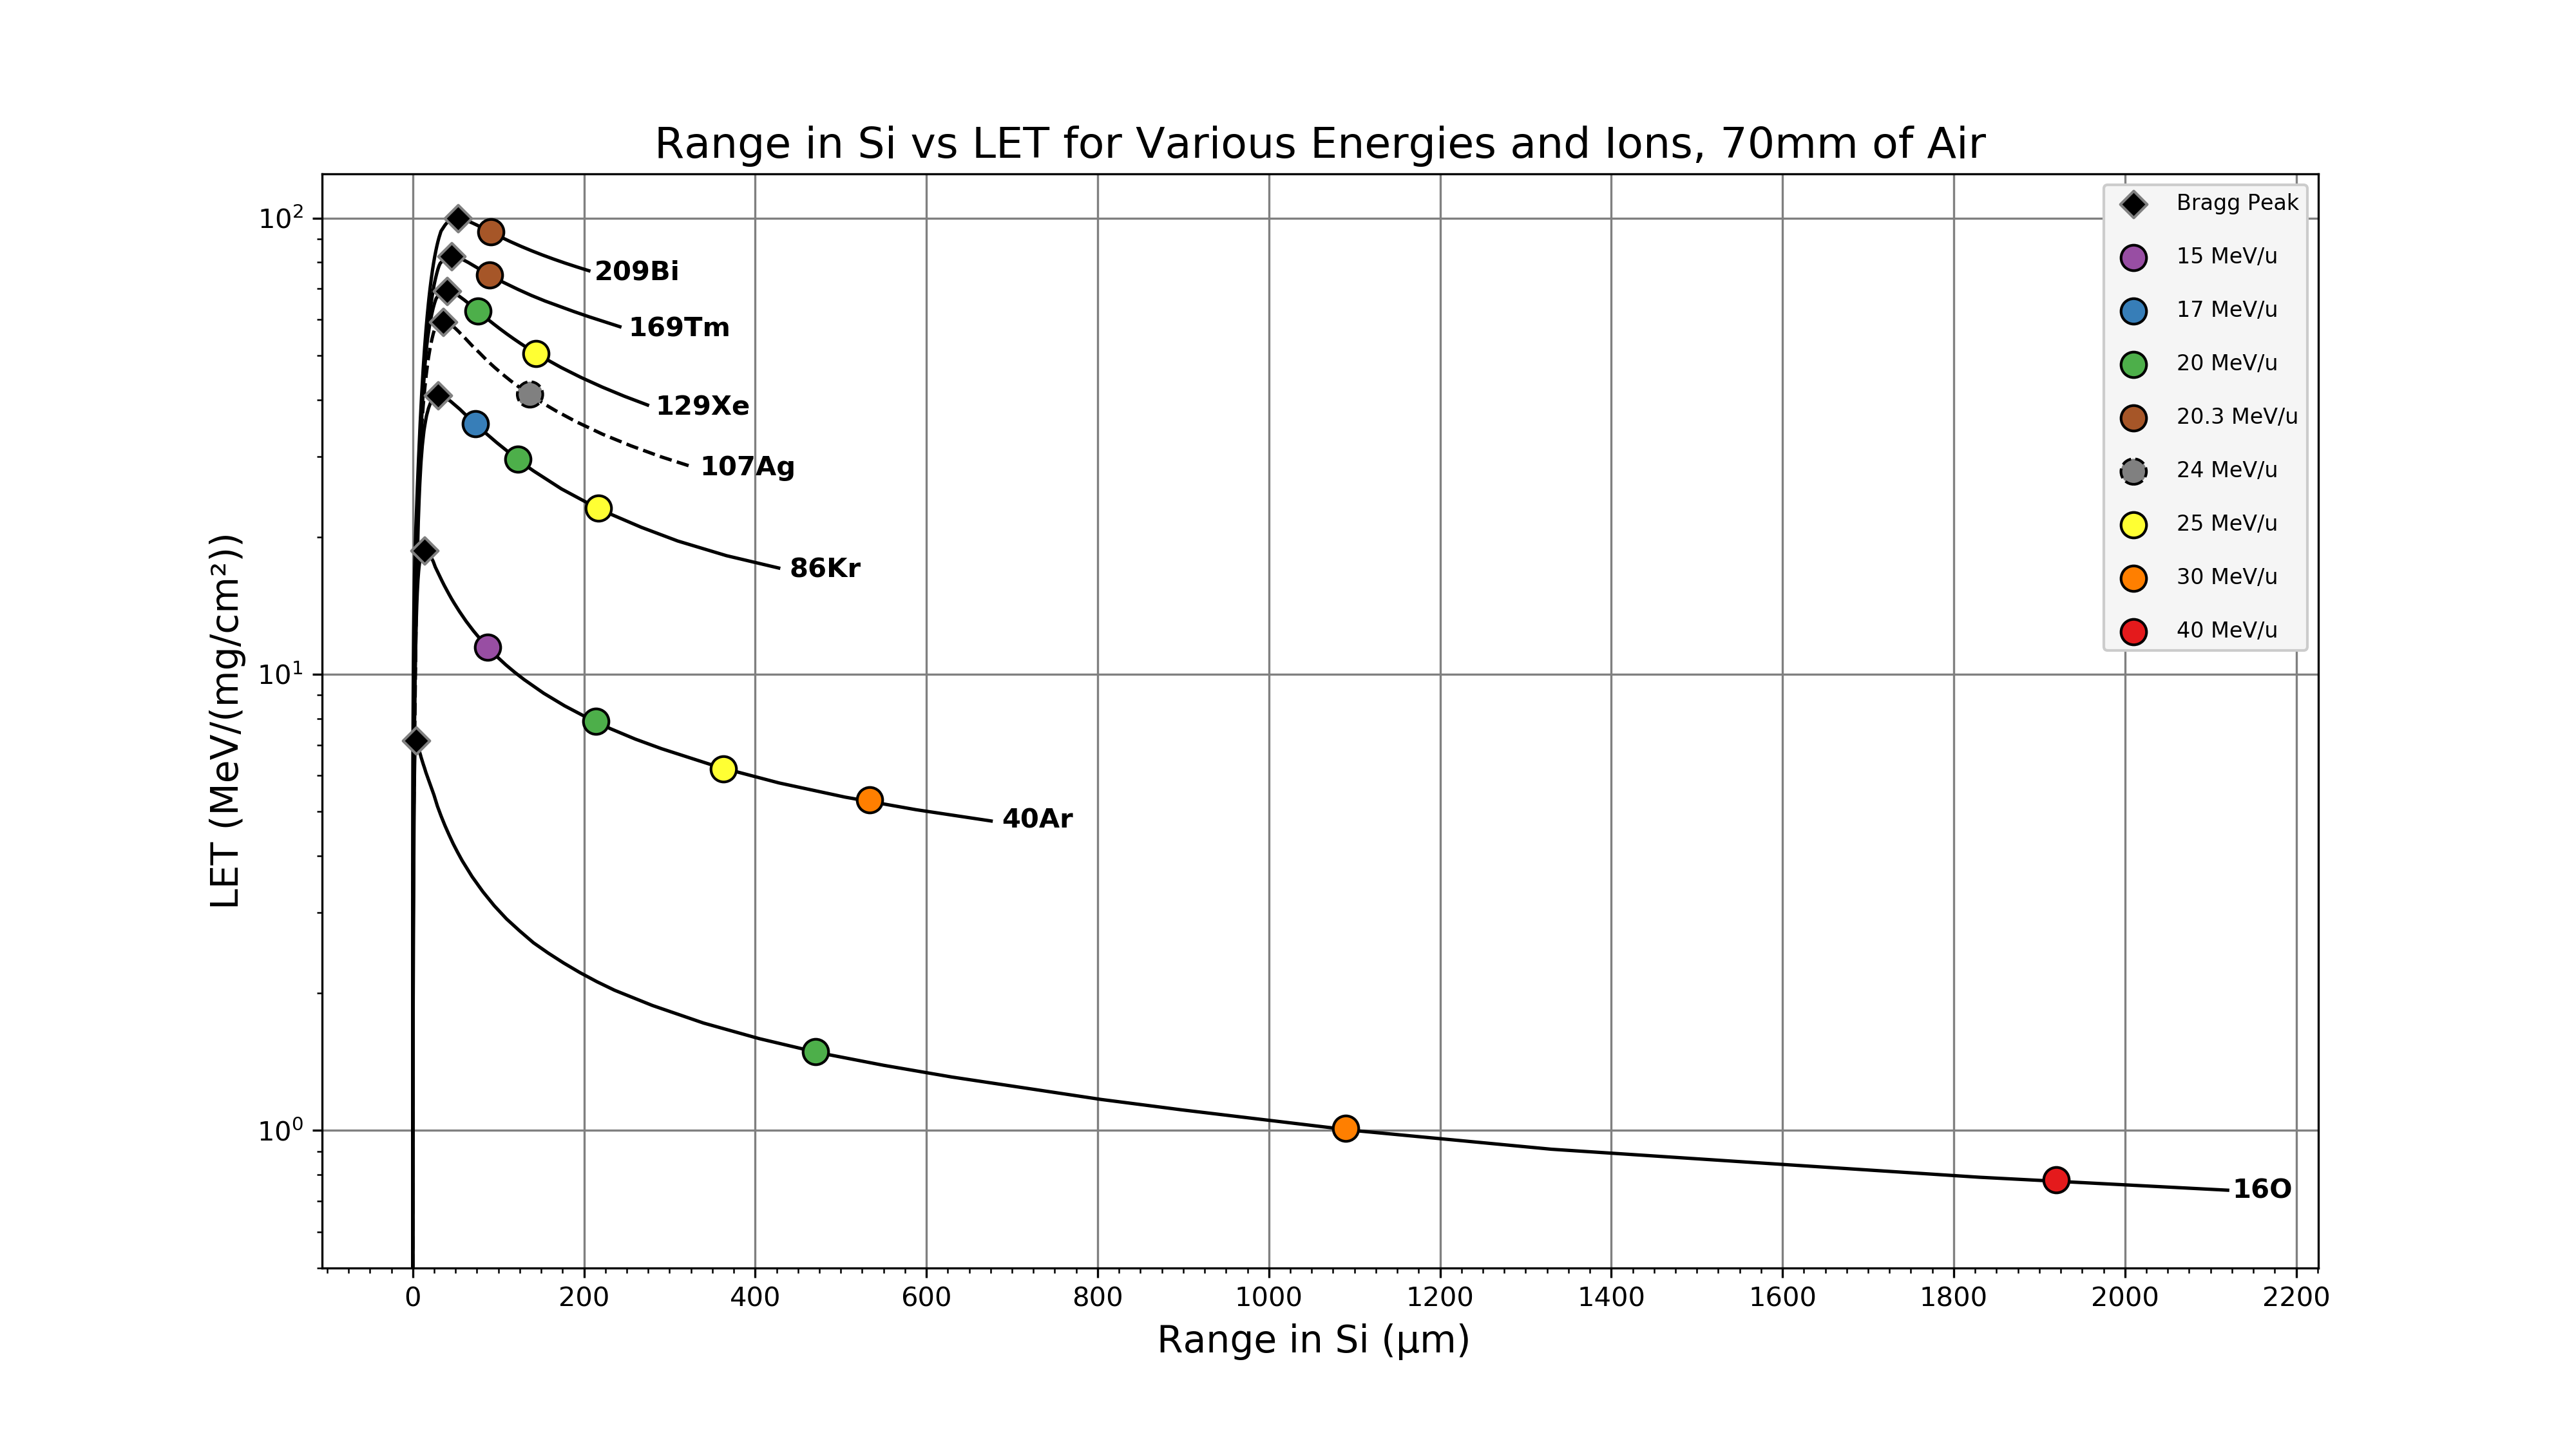 Graph showing range in Si vs LET for various energies and ions, 70mm of air.